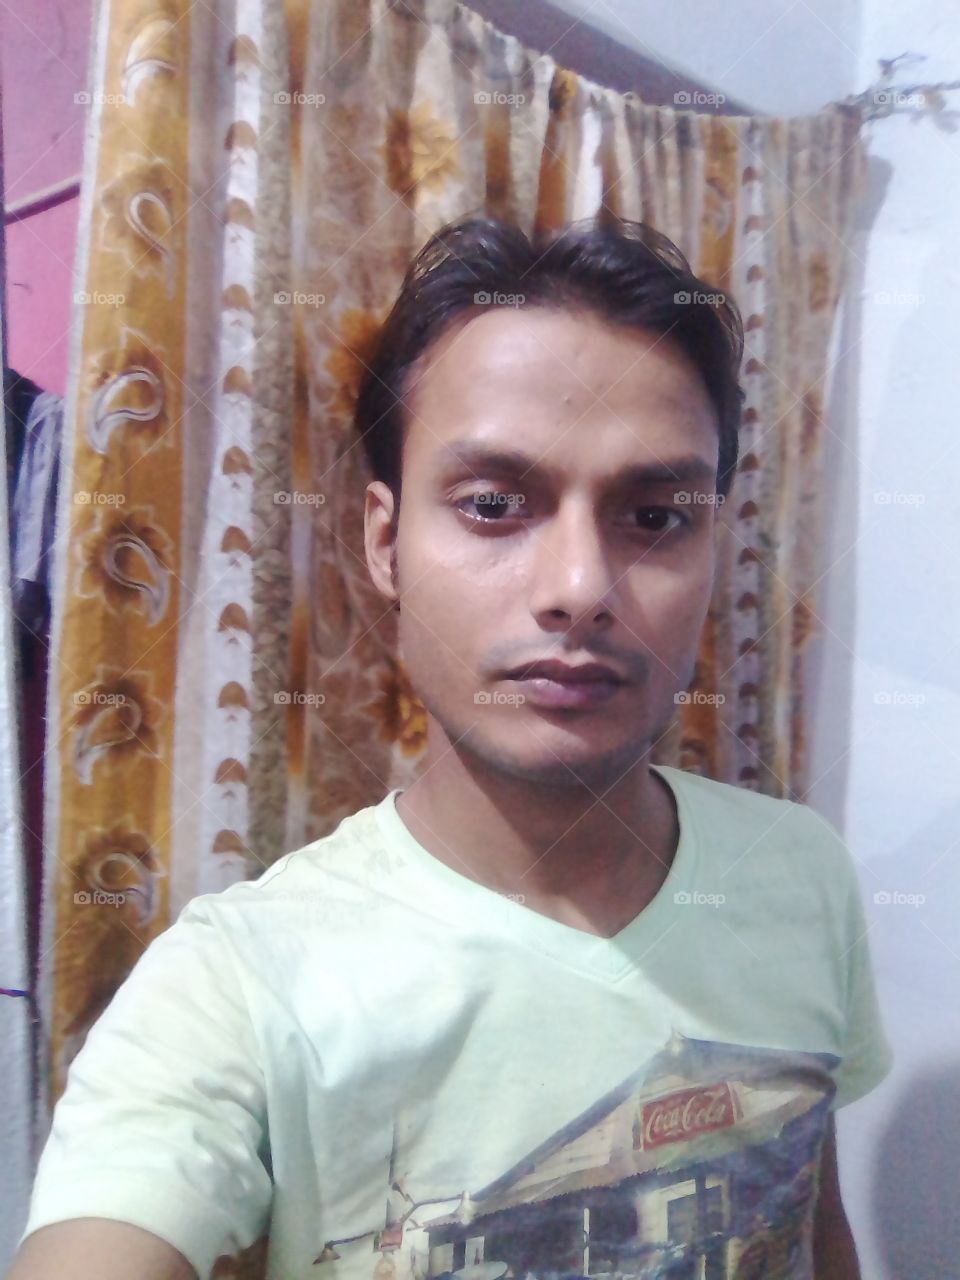 selfy in small room